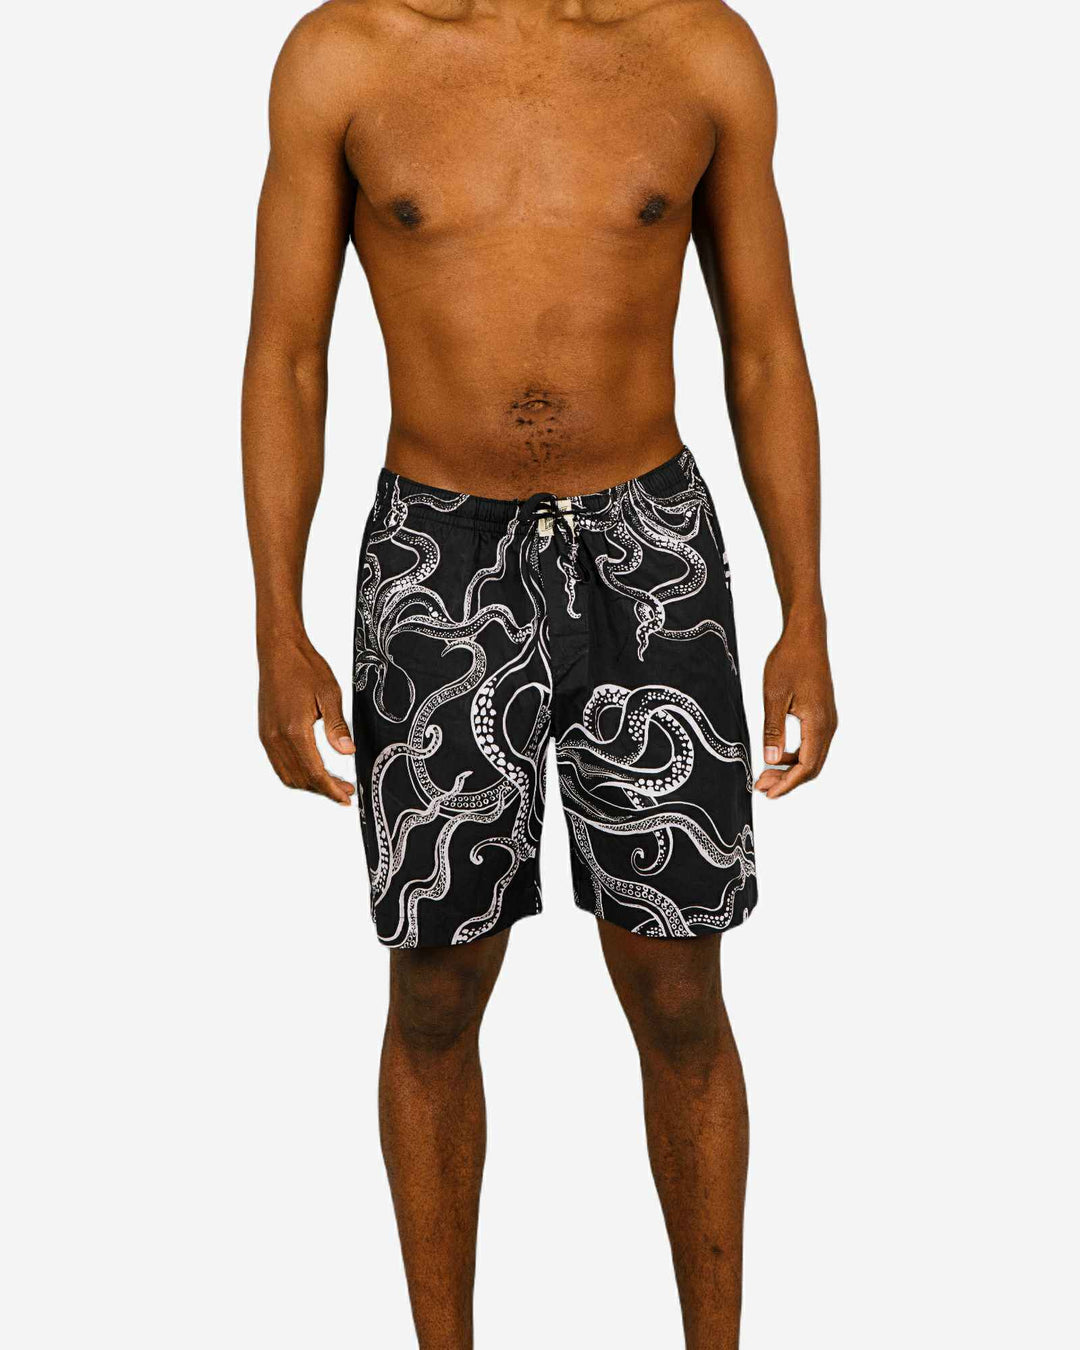 Mens lounge shorts with white octopuses on a black background